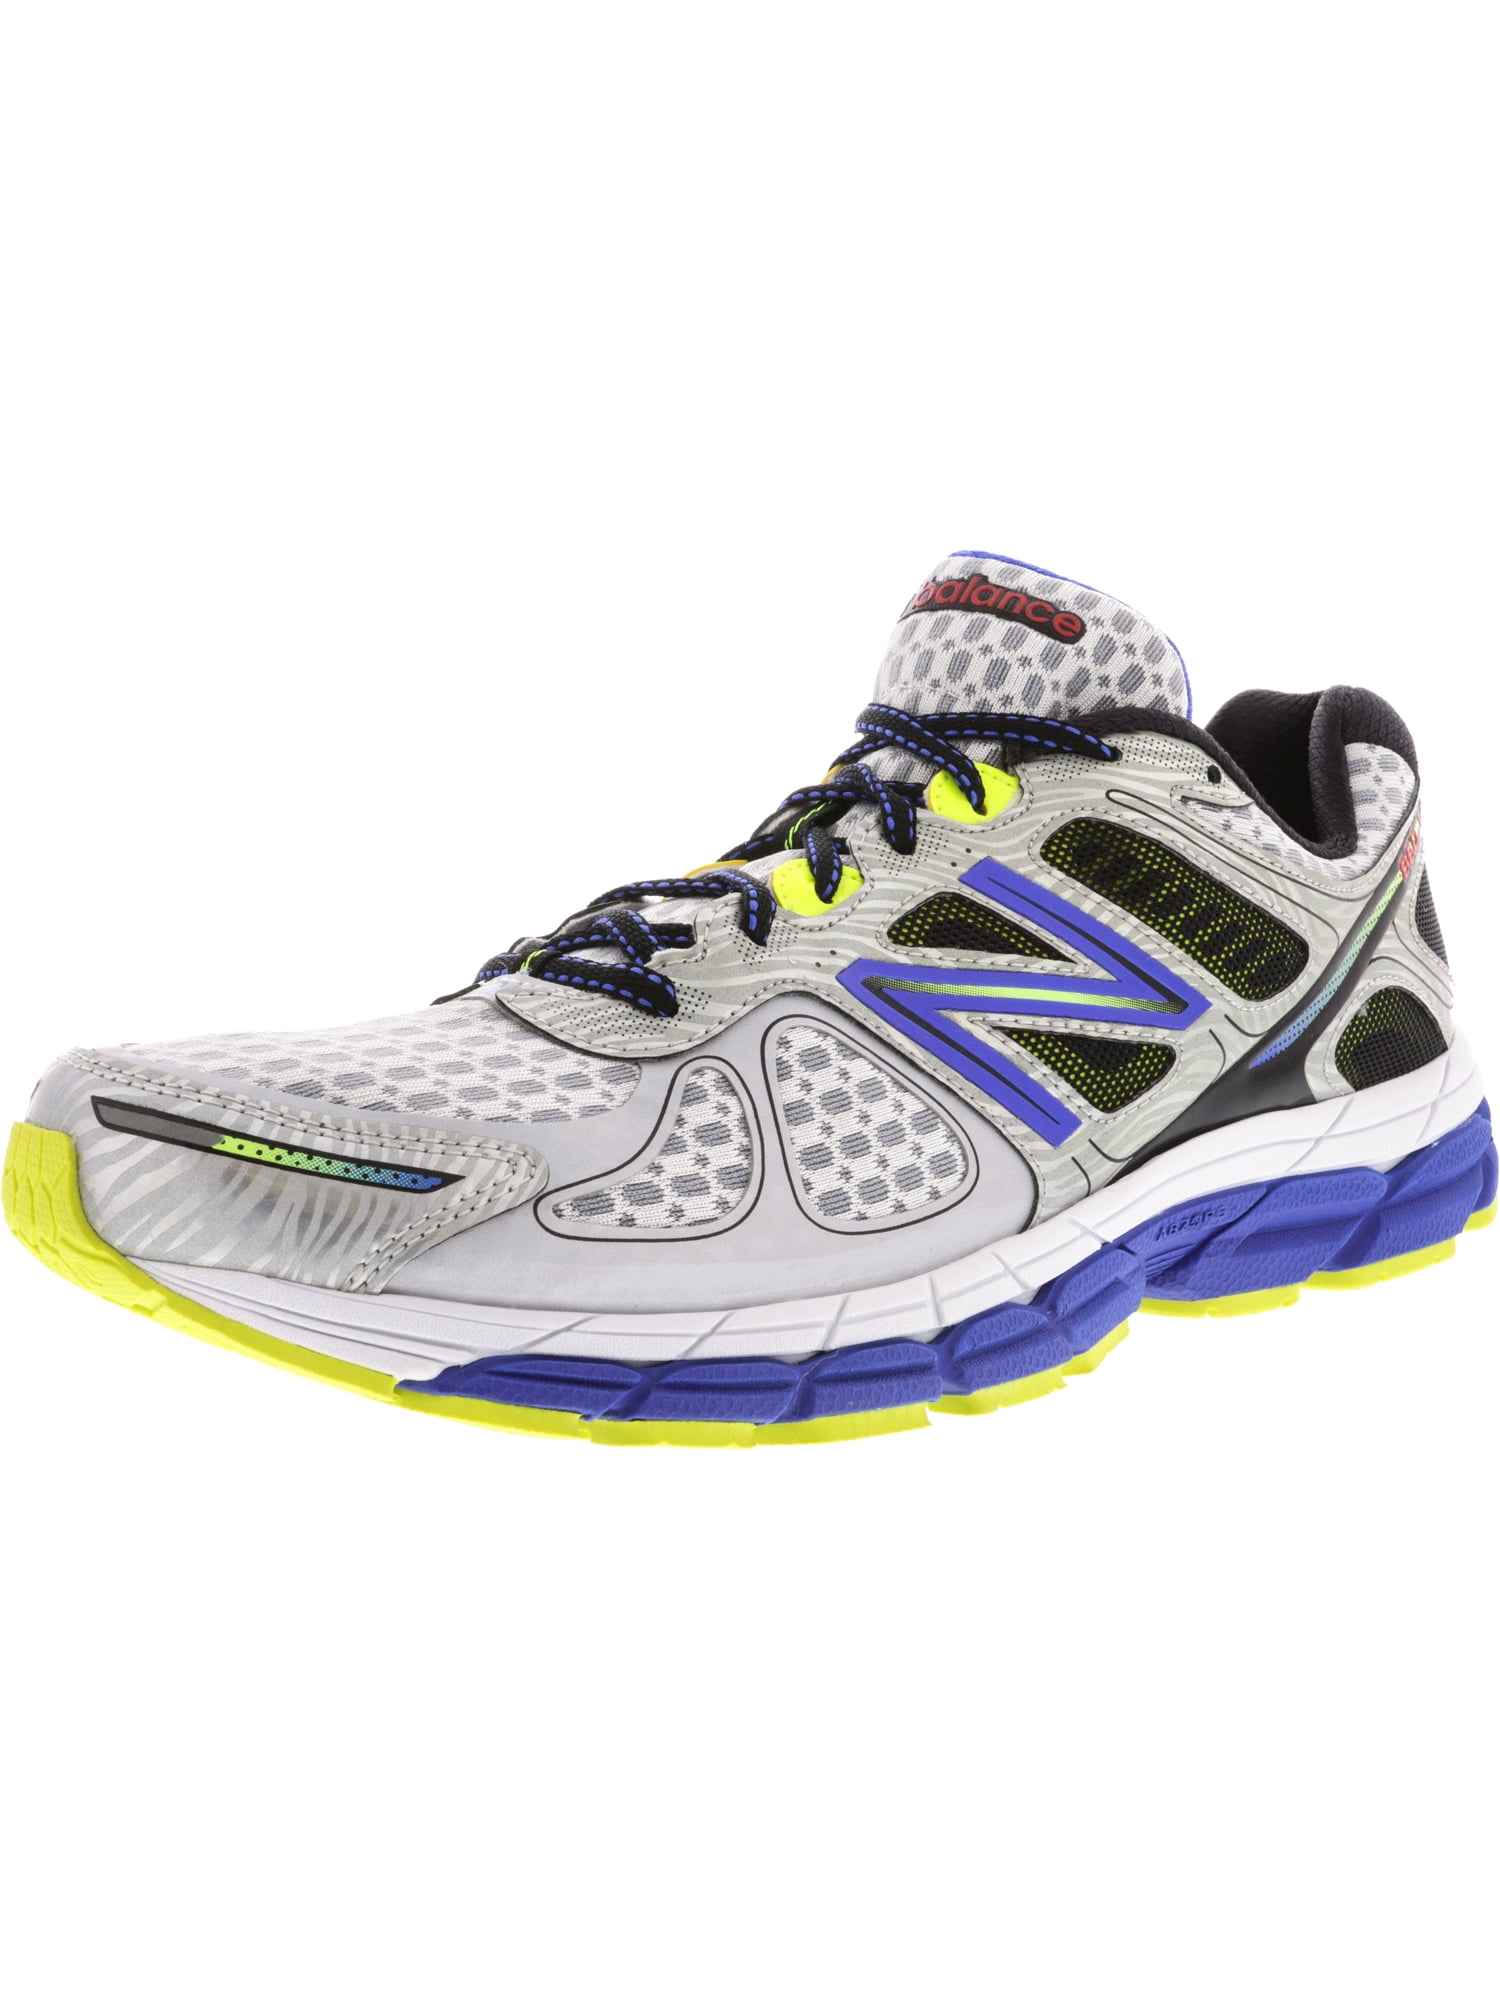 new balance 860v4 stability running shoes